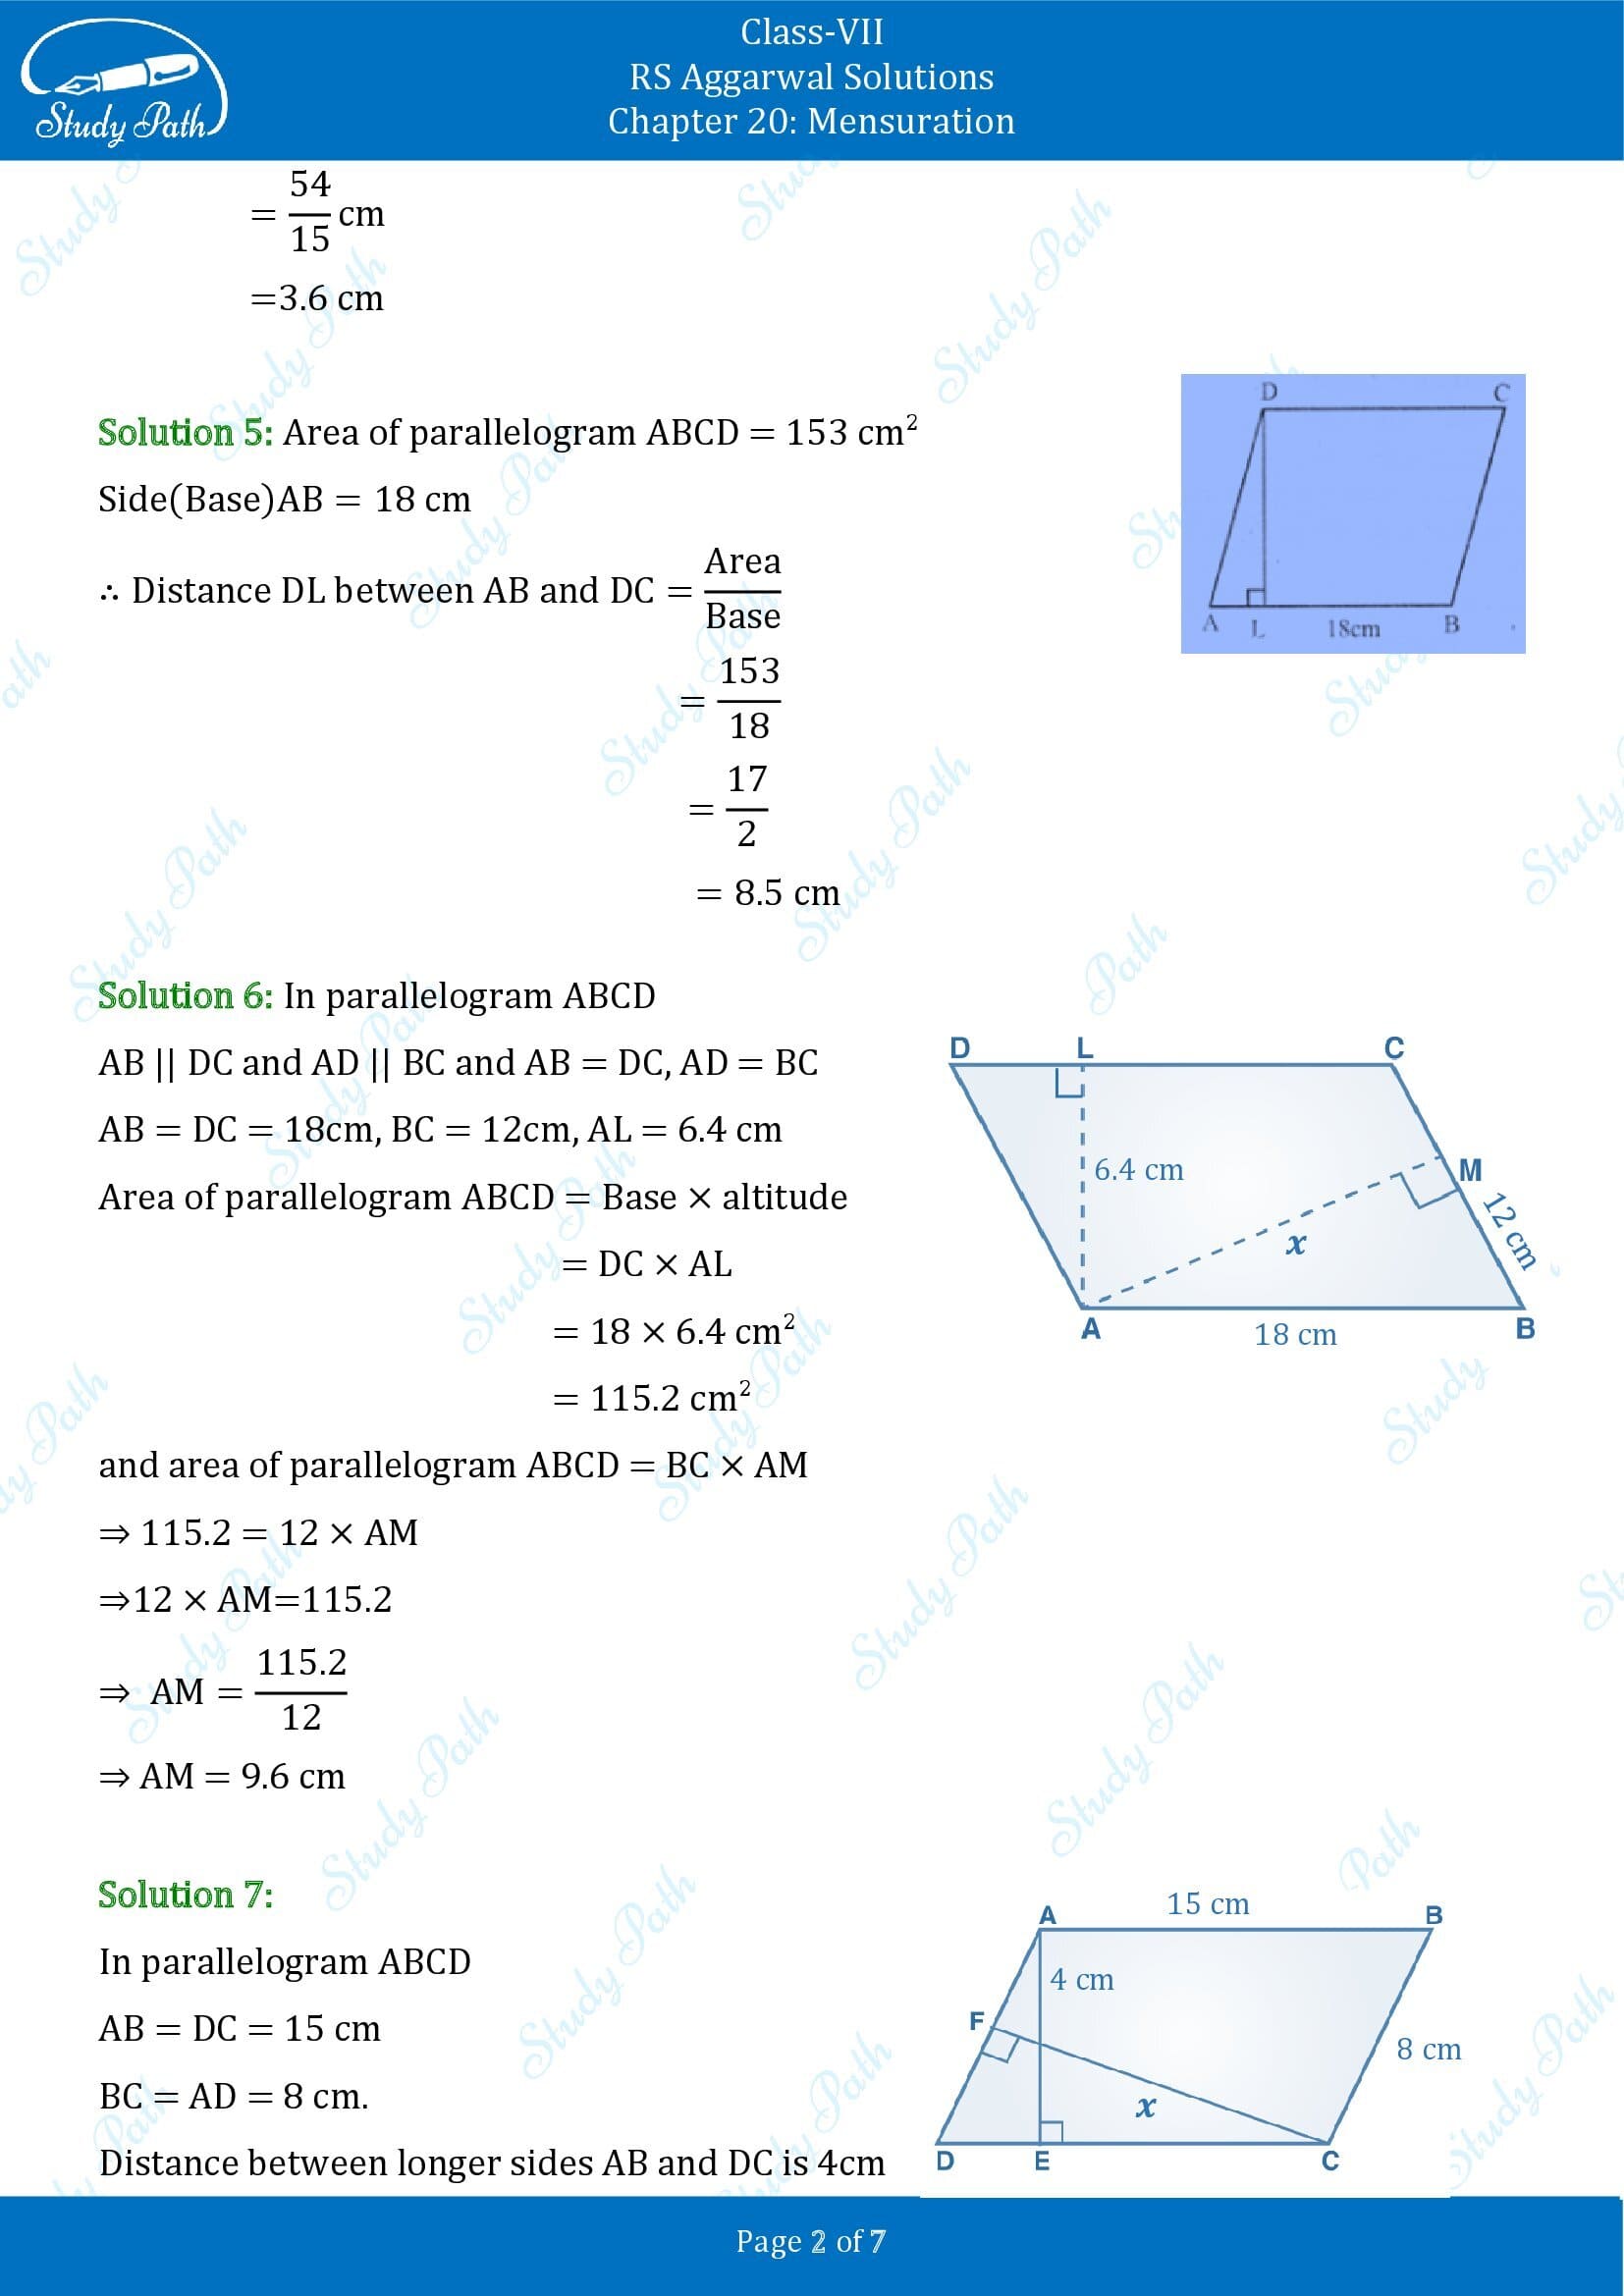 RS Aggarwal Solutions Class 7 Chapter 20 Mensuration Exercise 20C 00002